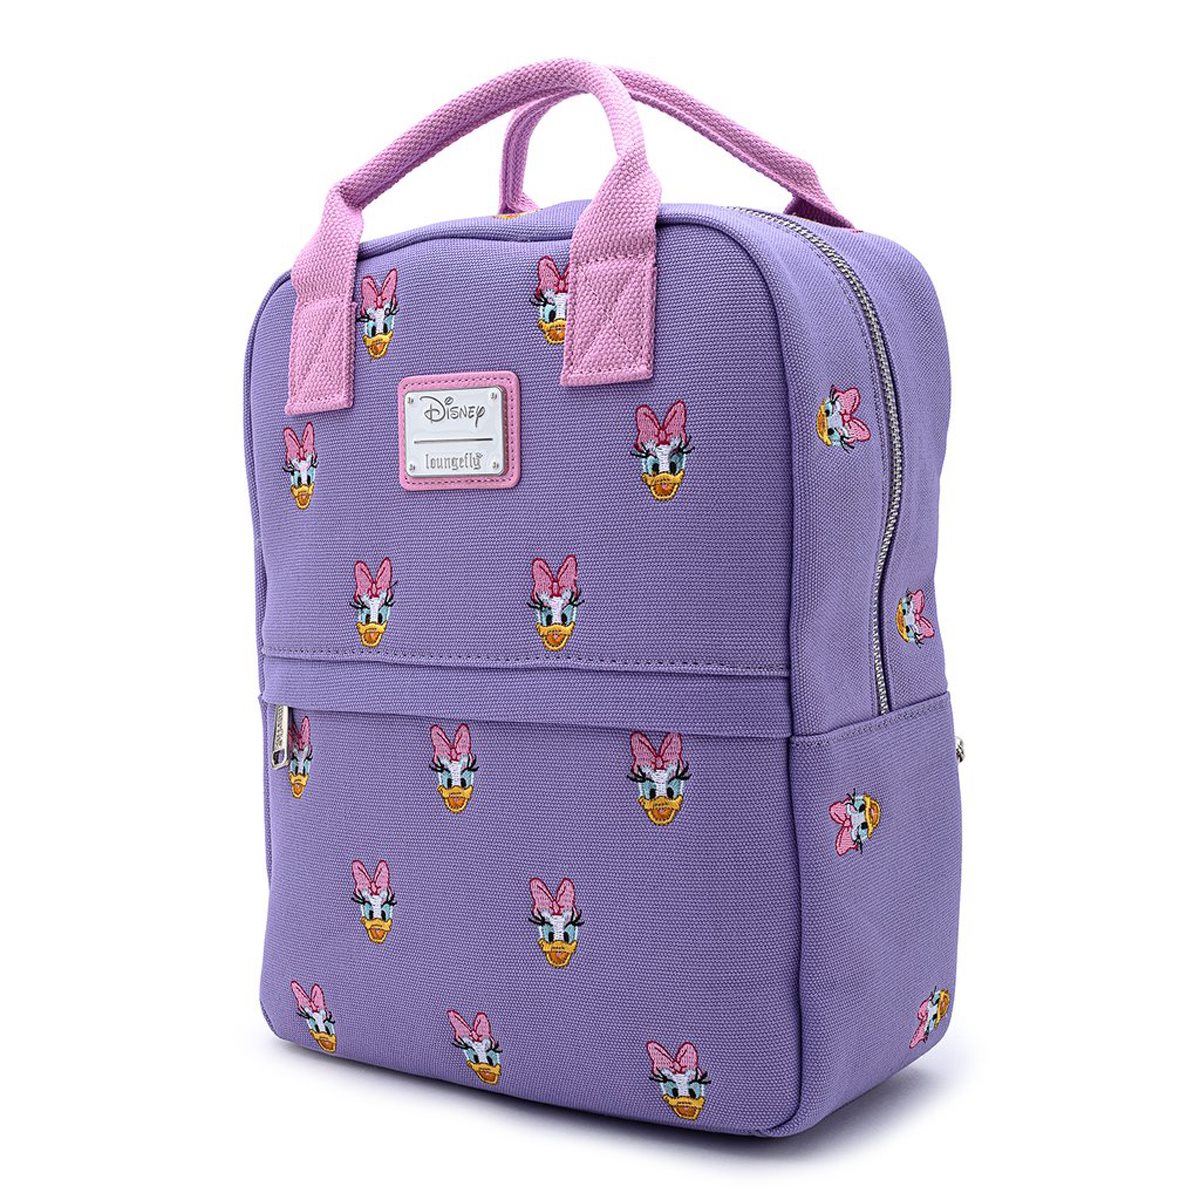 journey backpack ditzy daisy